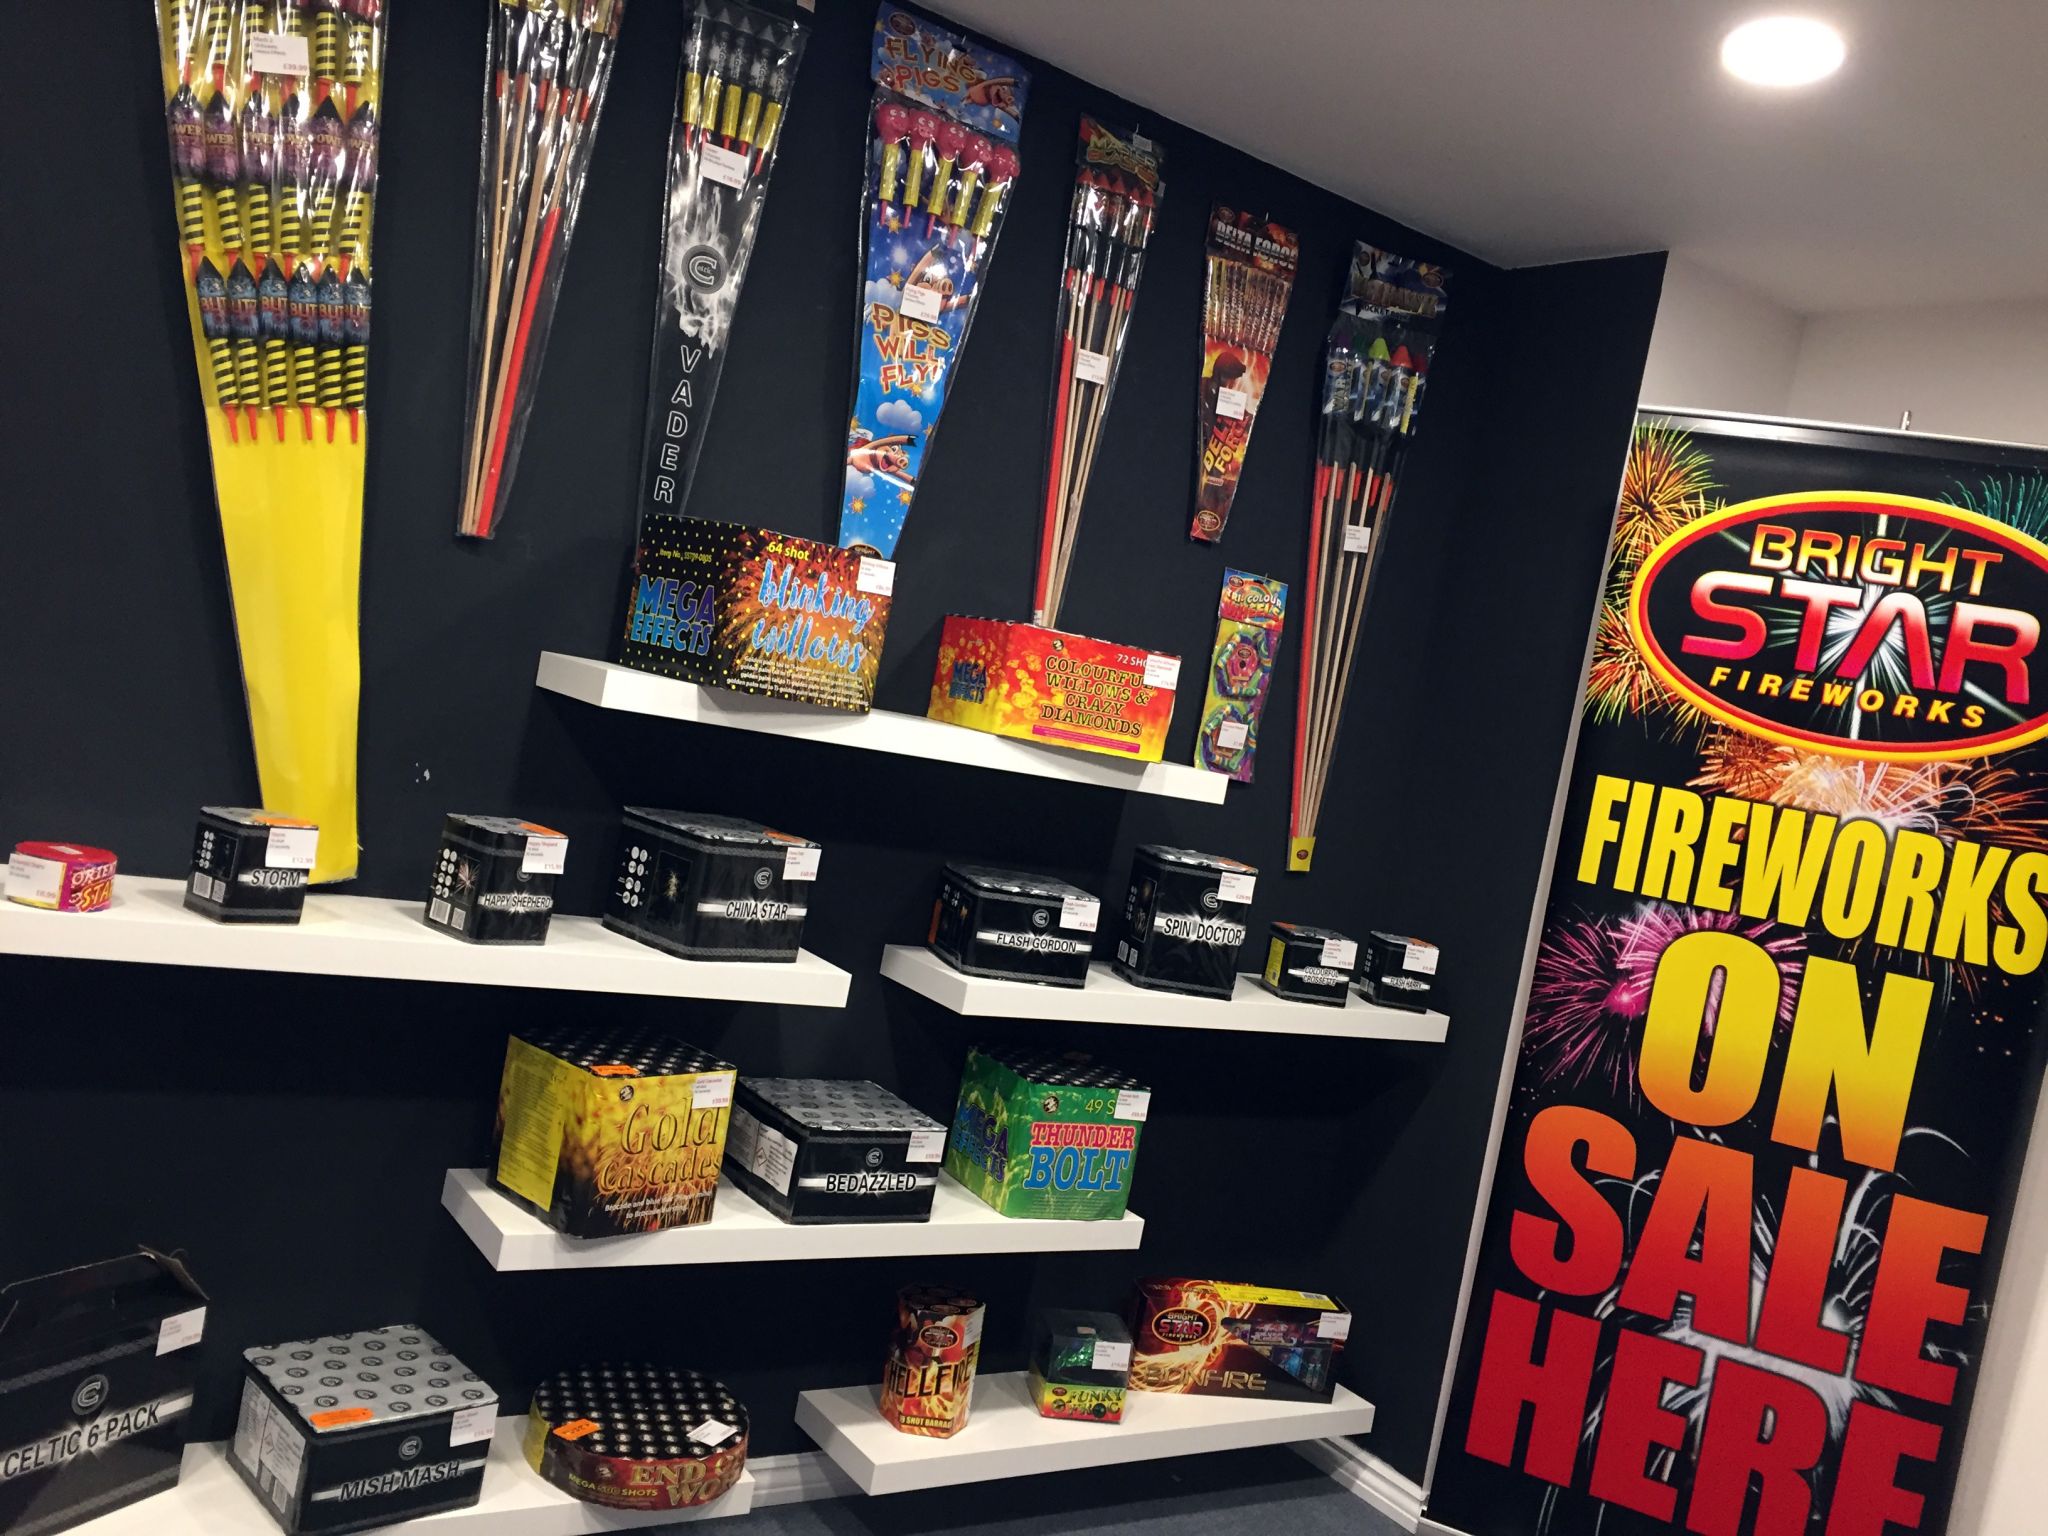 Our 2020 retail firework range is available!